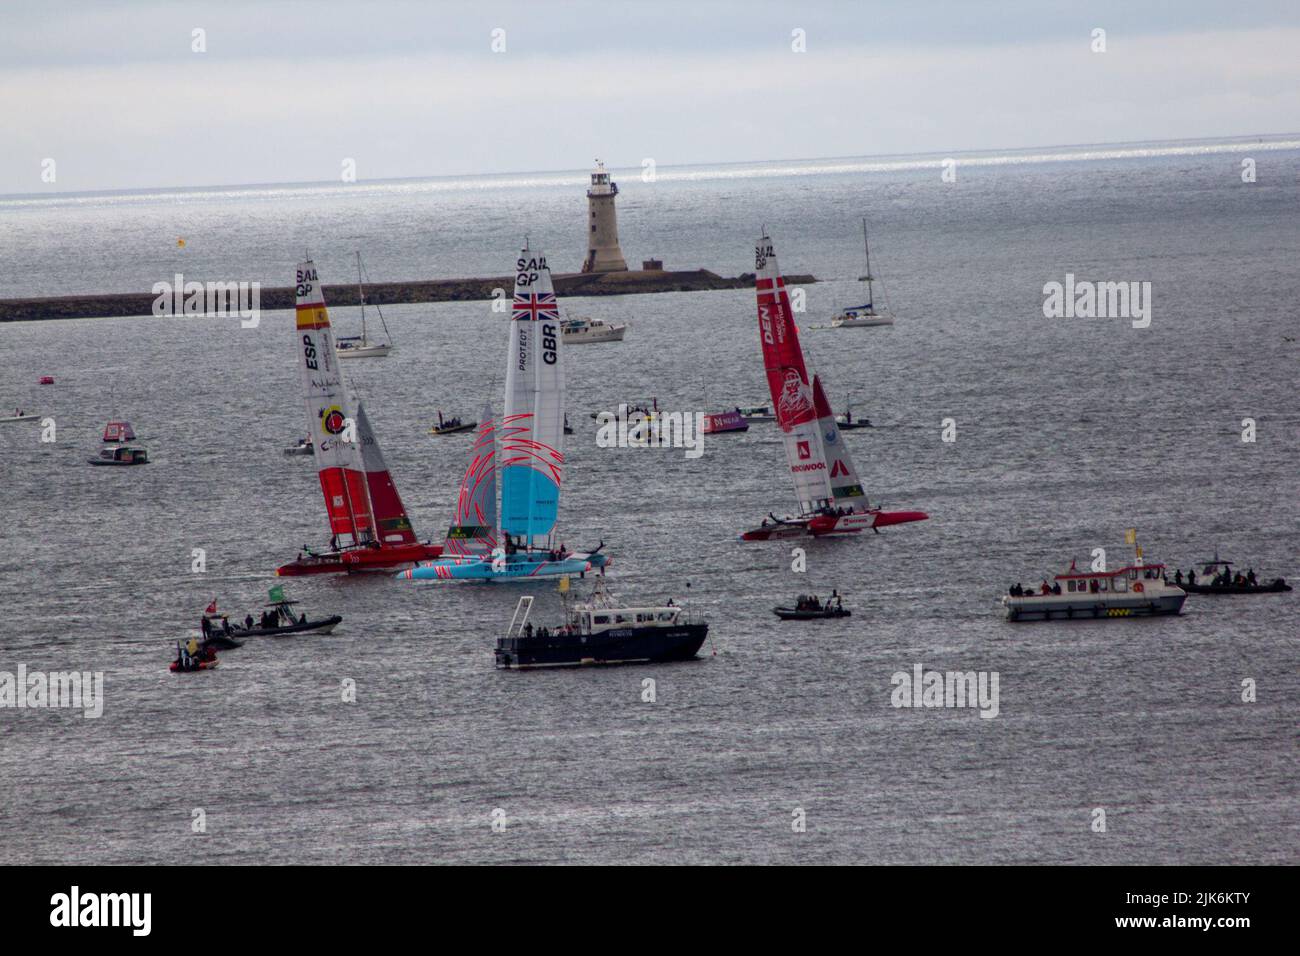 SailGP, Plymouth, UK. 31st July, 2022. Final day for the Great British Sail Grand Prix, as Britain's Ocean City hosts the third event of Season 3 as the most competitive racing on water. The event returns to Plymouth on 30-31 July. Credit: Julian Kemp/Alamy Live News Stock Photo